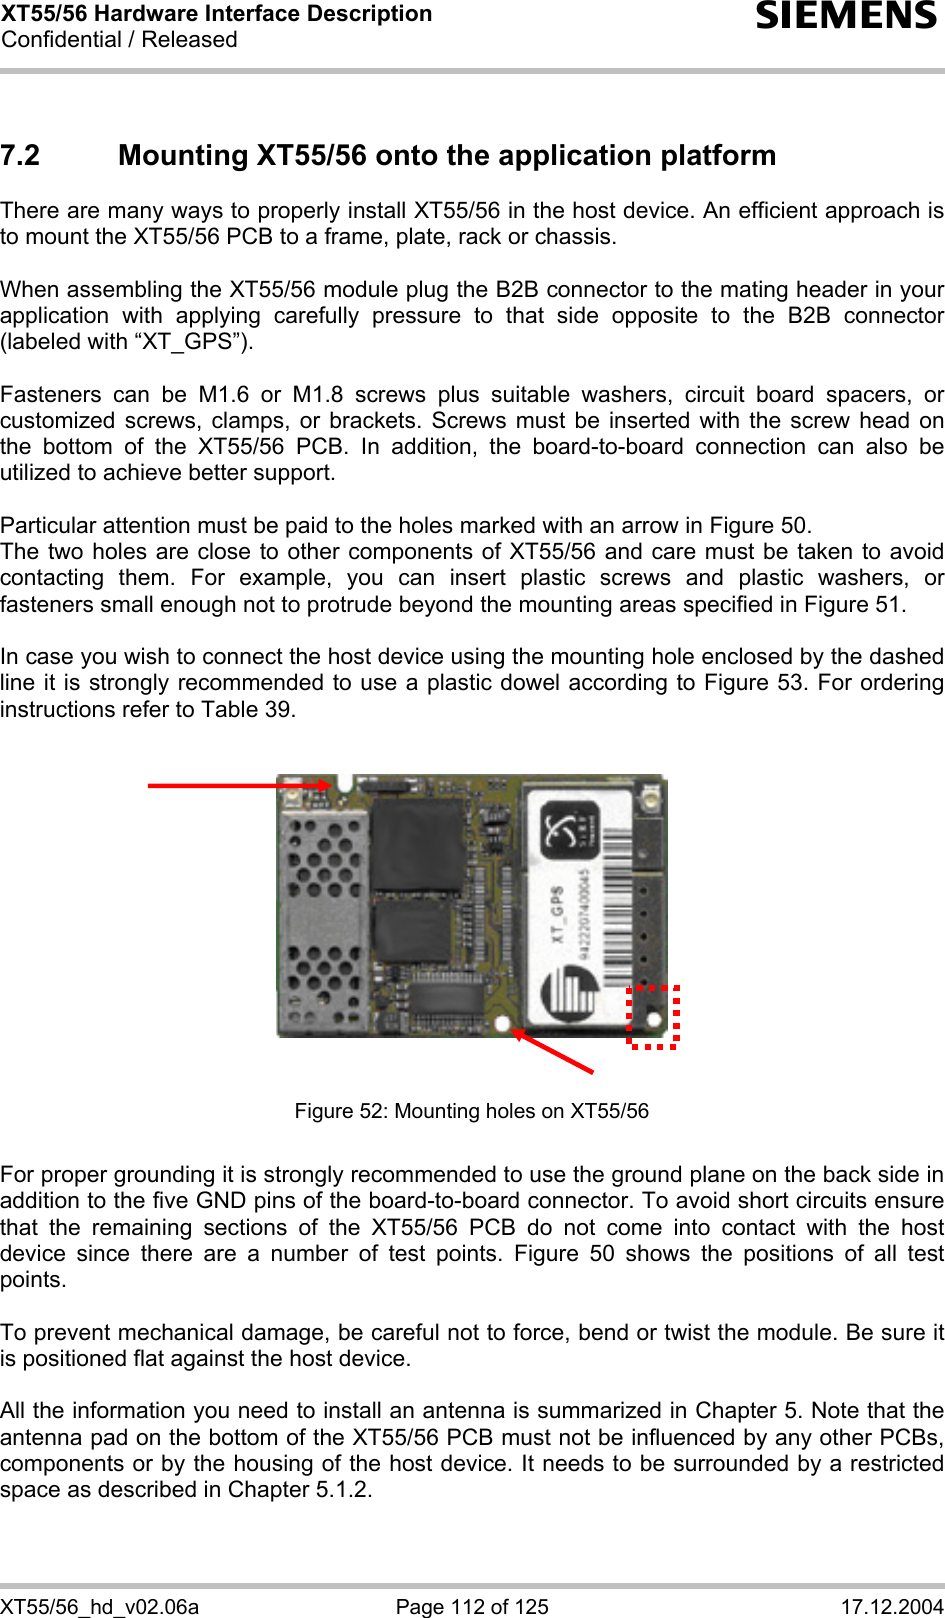 XT55/56 Hardware Interface Description Confidential / Released s XT55/56_hd_v02.06a  Page 112 of 125  17.12.2004 7.2  Mounting XT55/56 onto the application platform  There are many ways to properly install XT55/56 in the host device. An efficient approach is to mount the XT55/56 PCB to a frame, plate, rack or chassis.   When assembling the XT55/56 module plug the B2B connector to the mating header in your application with applying carefully pressure to that side opposite to the B2B connector (labeled with “XT_GPS”).  Fasteners can be M1.6 or M1.8 screws plus suitable washers, circuit board spacers, or customized screws, clamps, or brackets. Screws must be inserted with the screw head on the bottom of the XT55/56 PCB. In addition, the board-to-board connection can also be utilized to achieve better support.  Particular attention must be paid to the holes marked with an arrow in Figure 50.  The two holes are close to other components of XT55/56 and care must be taken to avoid contacting them. For example, you can insert plastic screws and plastic washers, or fasteners small enough not to protrude beyond the mounting areas specified in Figure 51.   In case you wish to connect the host device using the mounting hole enclosed by the dashed line it is strongly recommended to use a plastic dowel according to Figure 53. For ordering instructions refer to Table 39.     Figure 52: Mounting holes on XT55/56   For proper grounding it is strongly recommended to use the ground plane on the back side in addition to the five GND pins of the board-to-board connector. To avoid short circuits ensure that the remaining sections of the XT55/56 PCB do not come into contact with the host device since there are a number of test points. Figure 50 shows the positions of all test points.  To prevent mechanical damage, be careful not to force, bend or twist the module. Be sure it is positioned flat against the host device.  All the information you need to install an antenna is summarized in Chapter 5. Note that the antenna pad on the bottom of the XT55/56 PCB must not be influenced by any other PCBs, components or by the housing of the host device. It needs to be surrounded by a restricted space as described in Chapter 5.1.2.    